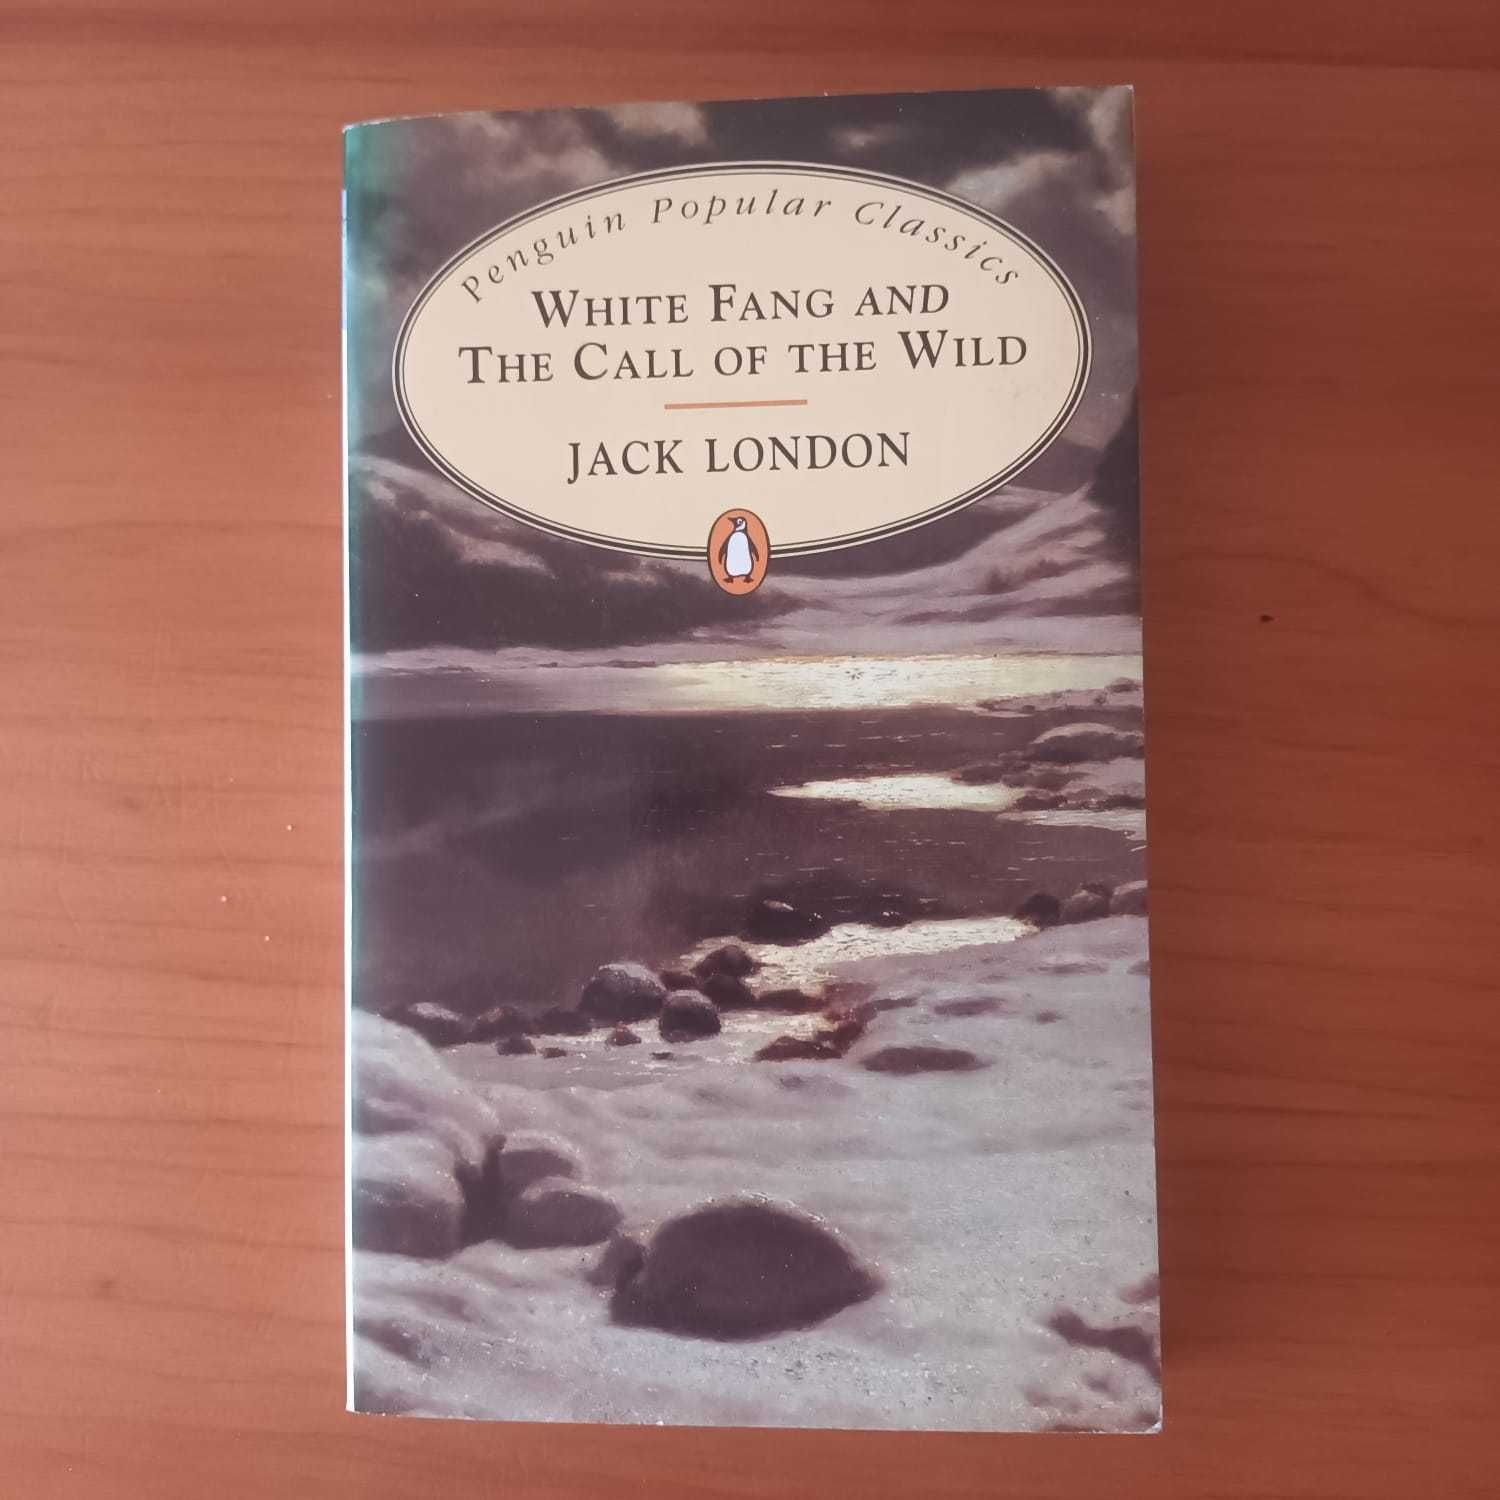 White Fang and the call of the wild - Jack London